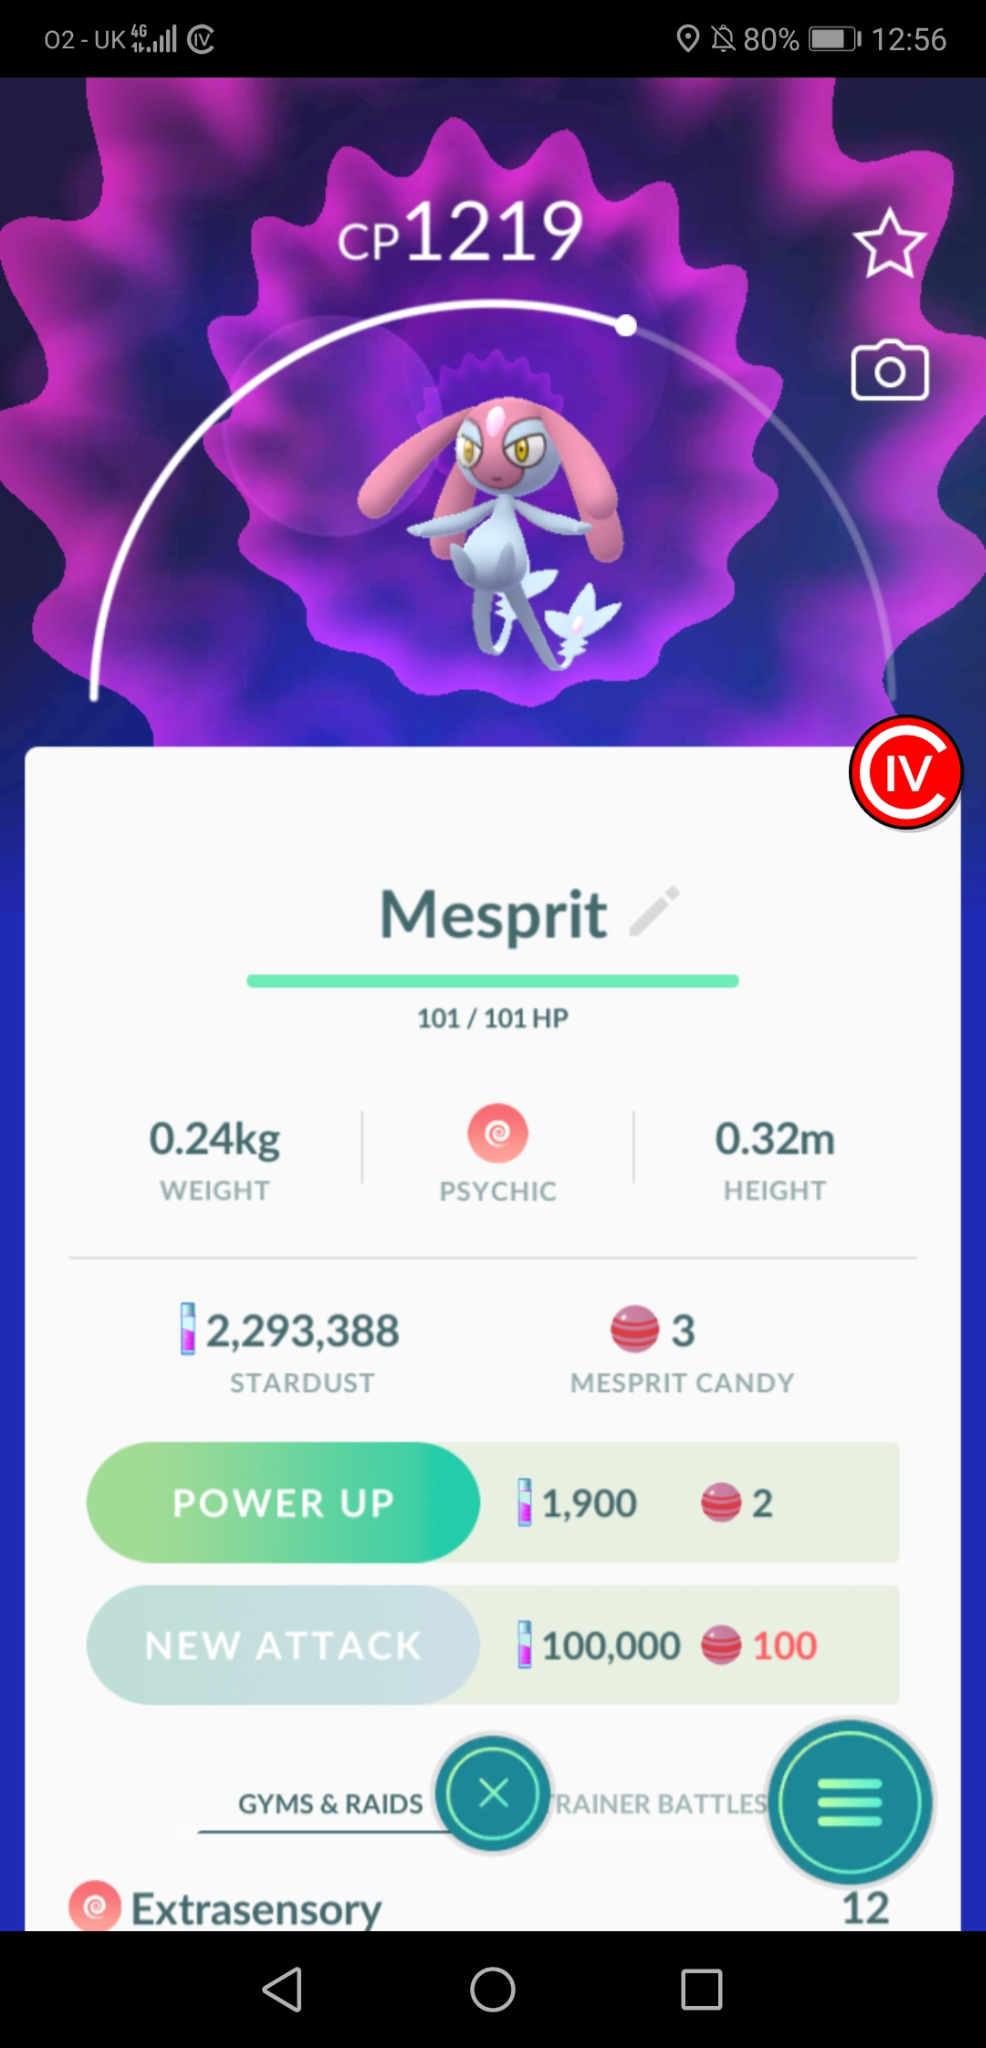 Mesprit Pokémon: How to catch, Stats, Moves, Strength, Weakness, Trivia ...